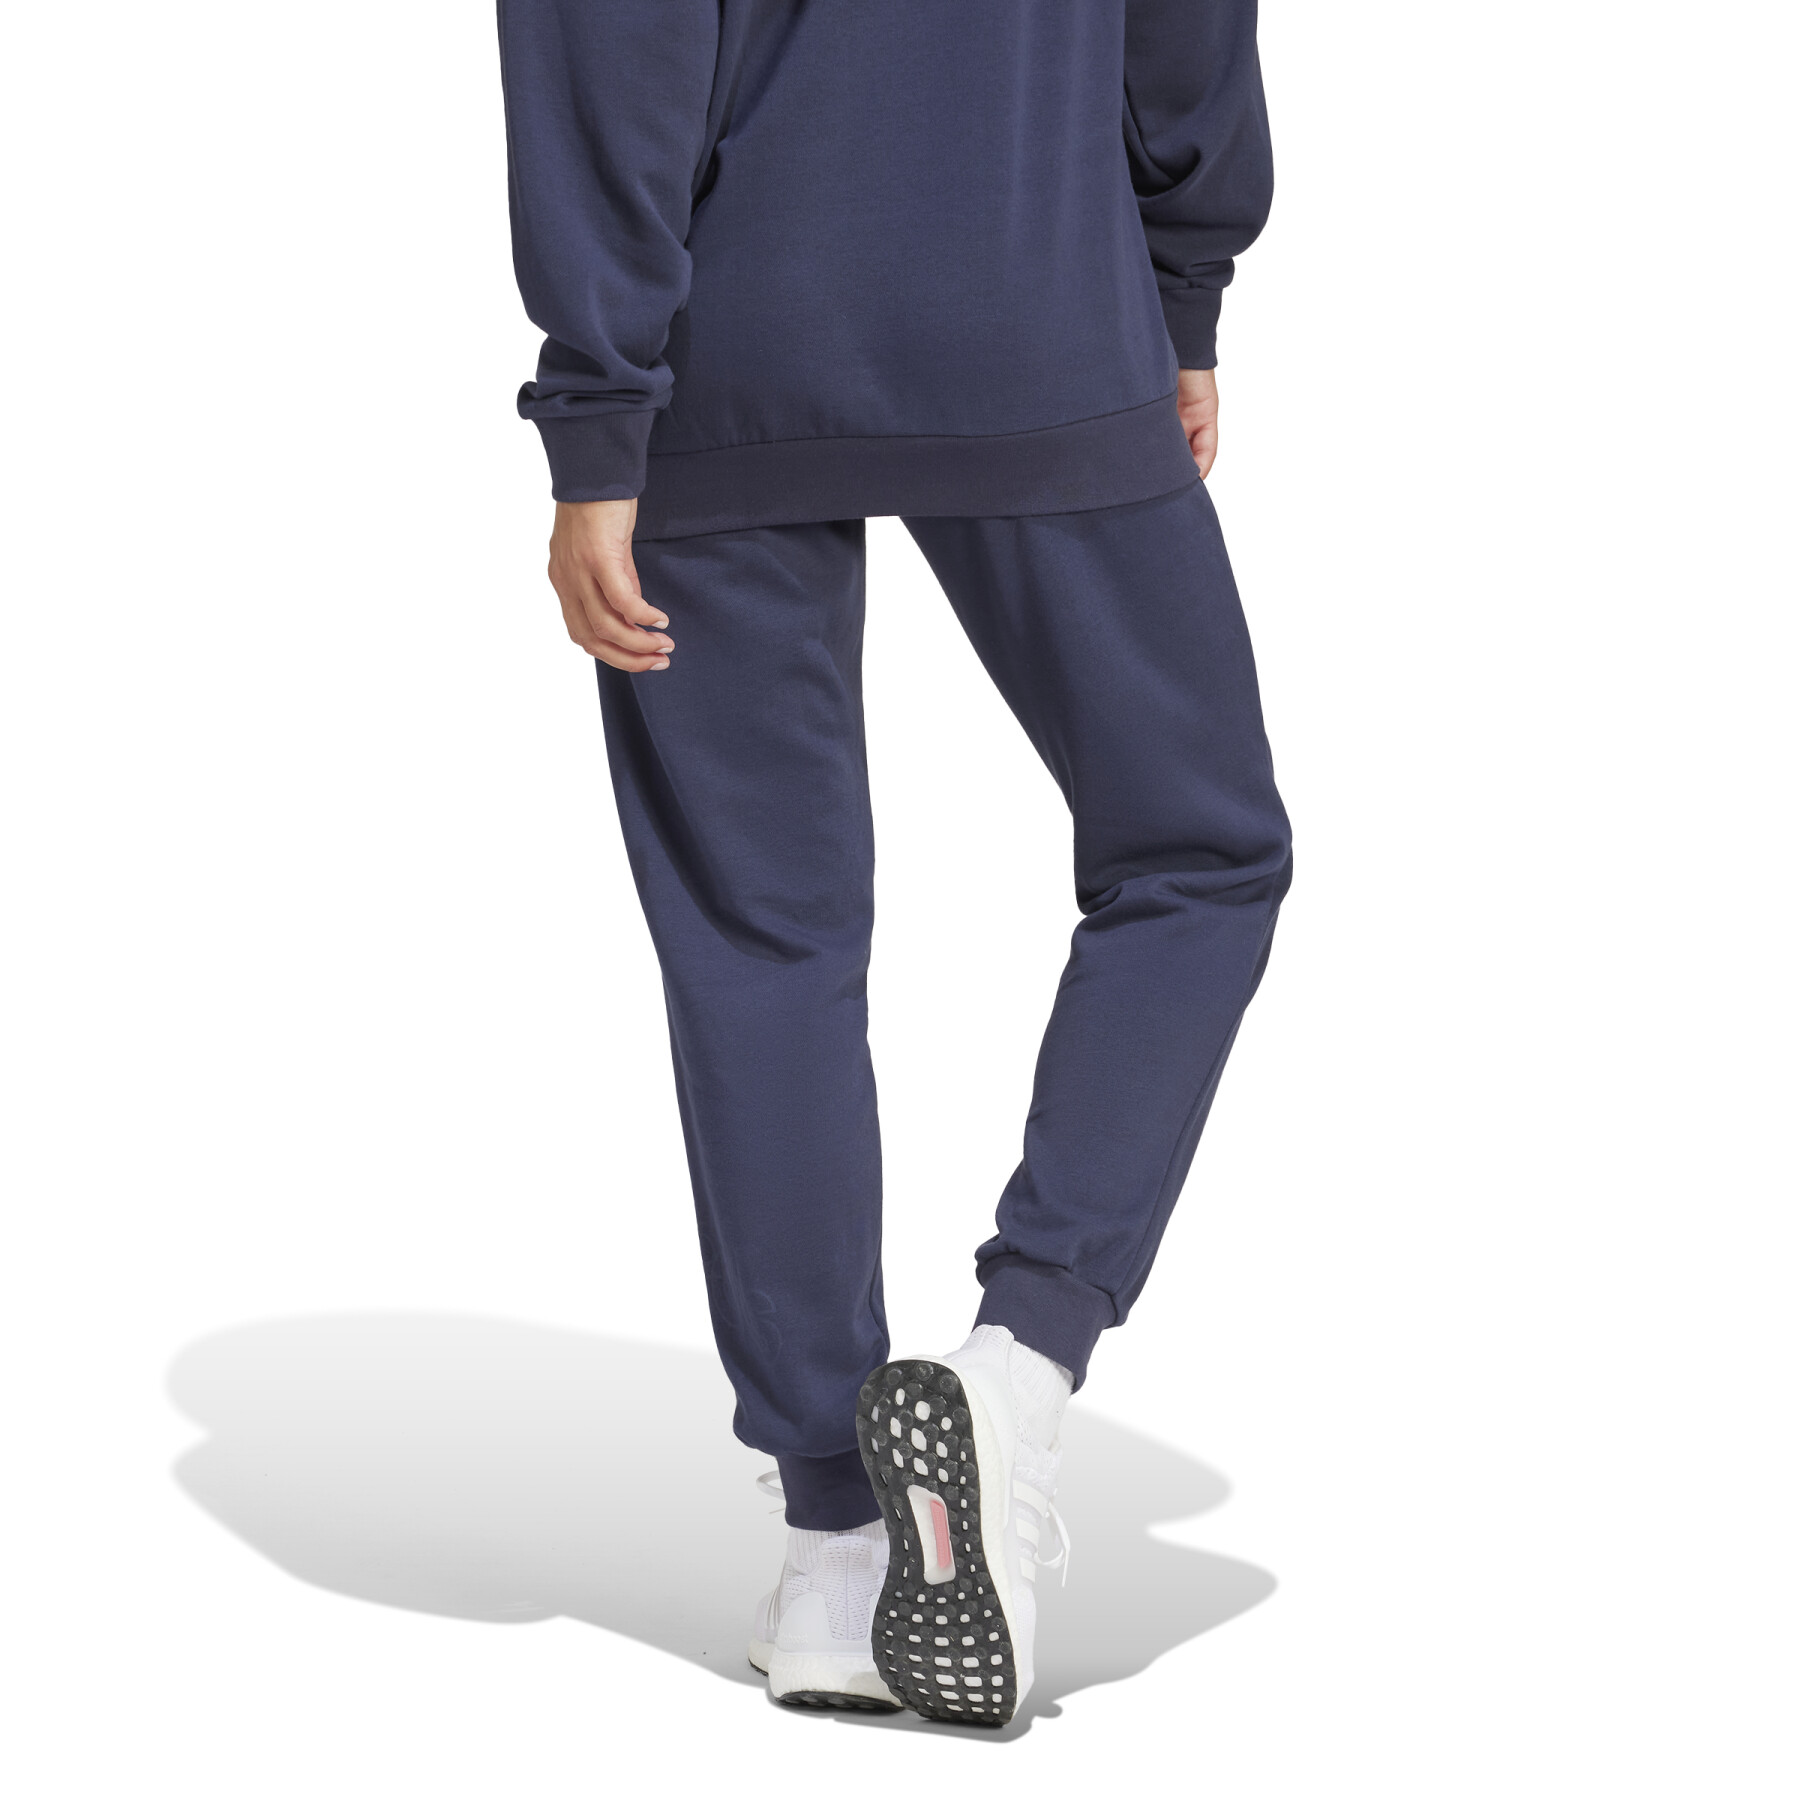 Women's french terry print jogging suit adidas